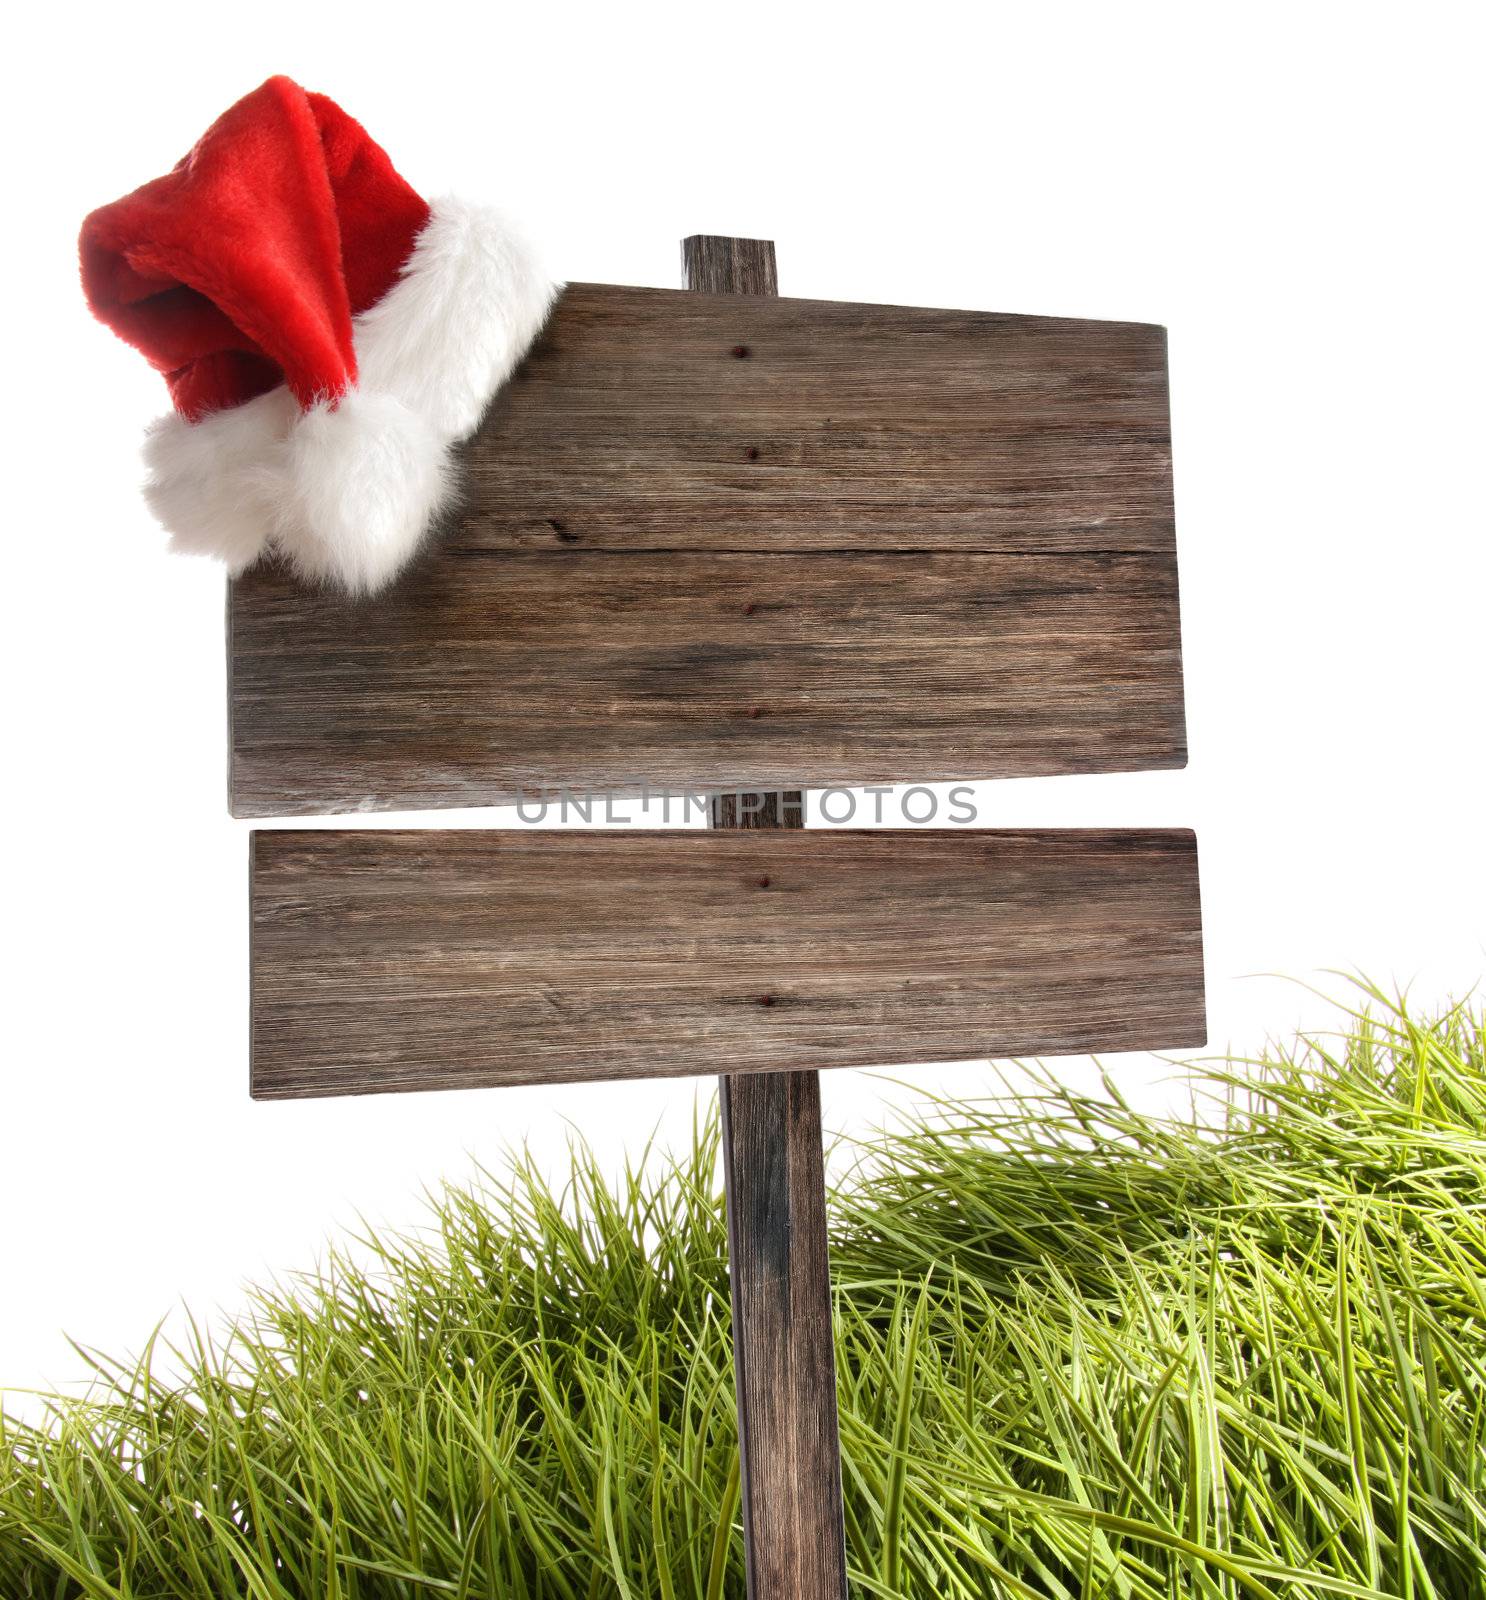 Weathered wooden sign with santa hat and grass on white